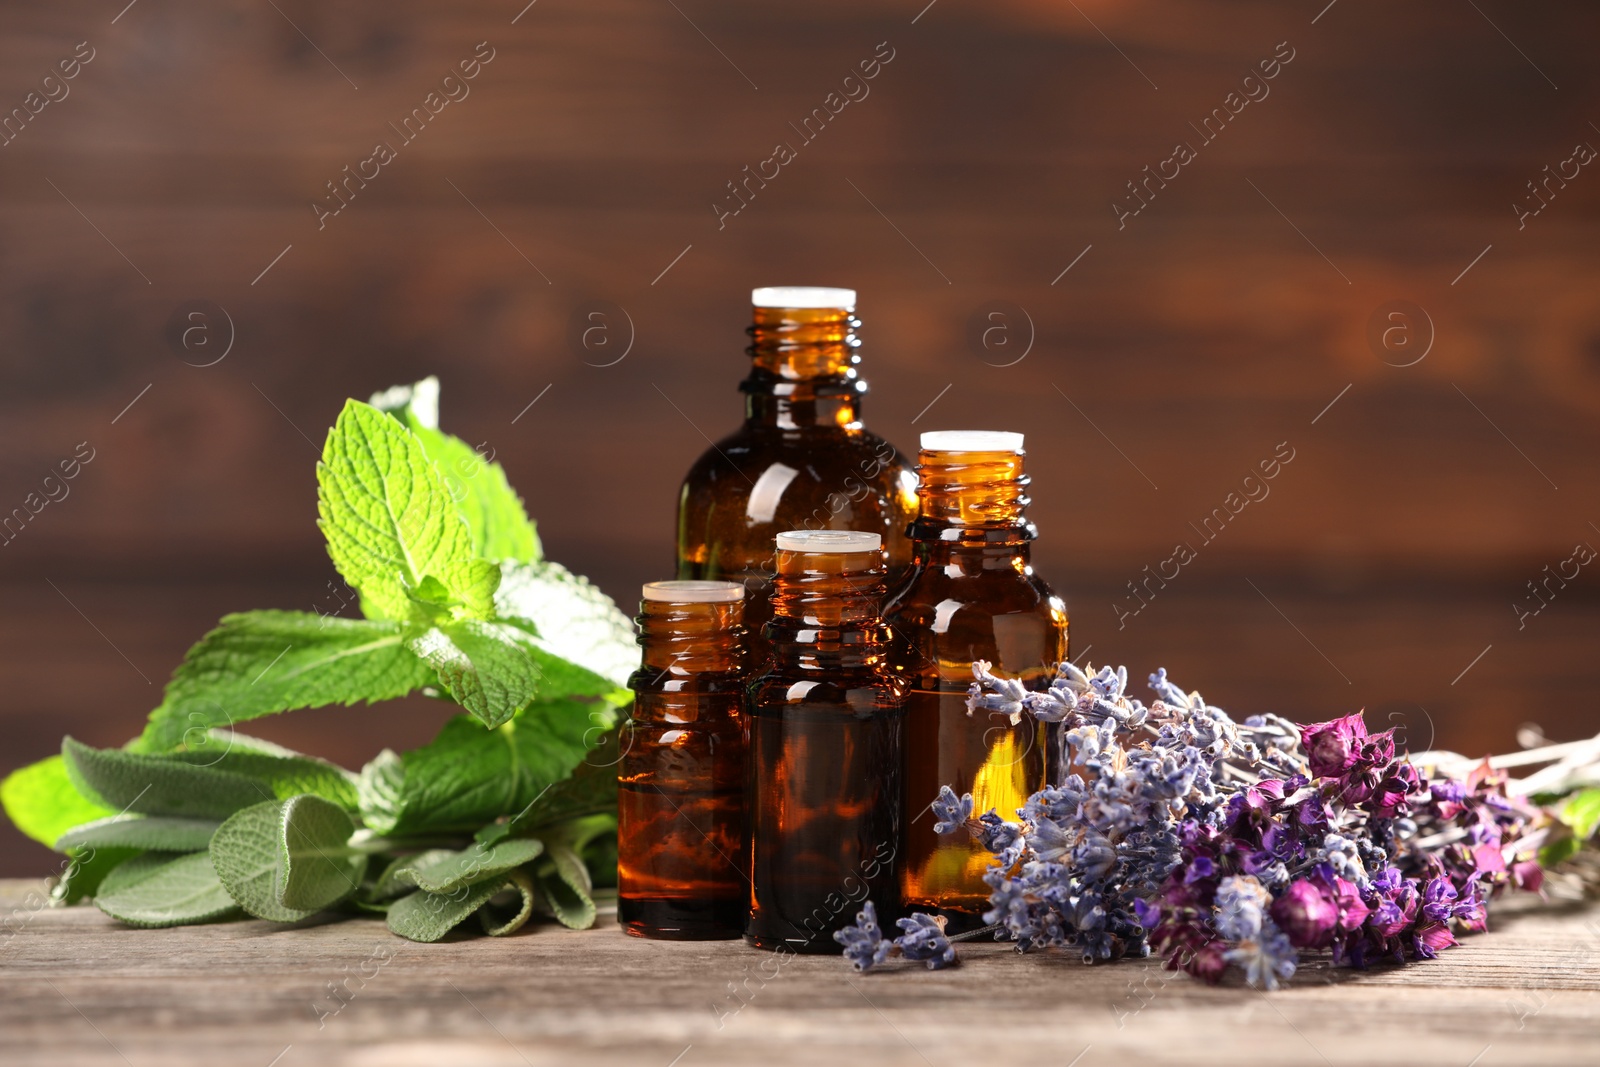 Photo of Bottles with essential oils, herbs and flowers on wooden table